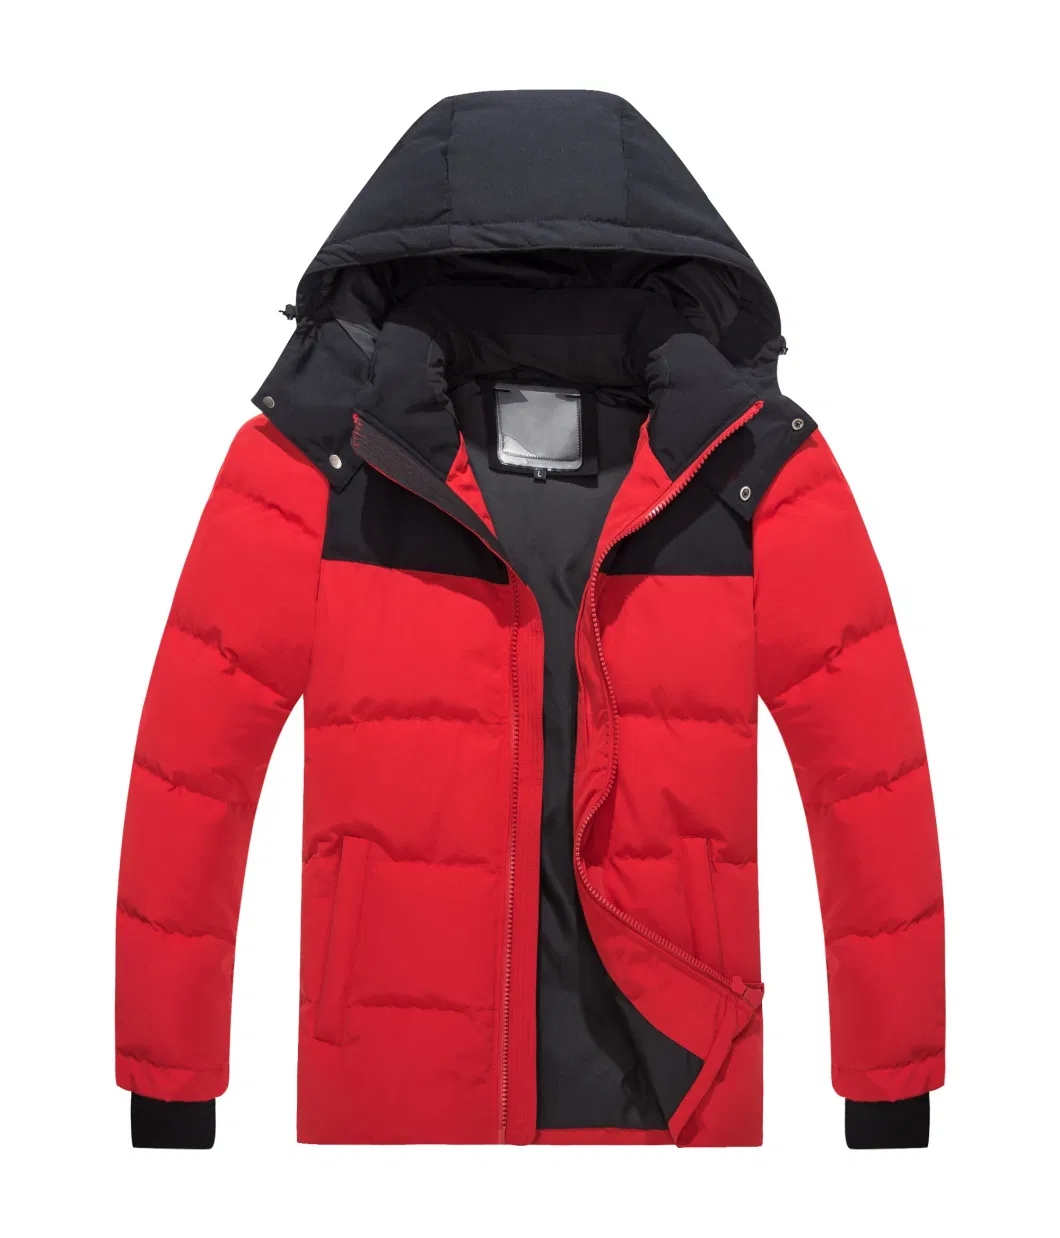 Coat Puffer Clothing Apparel Bomber Clothes Winter Jackets Down Jacket OEM